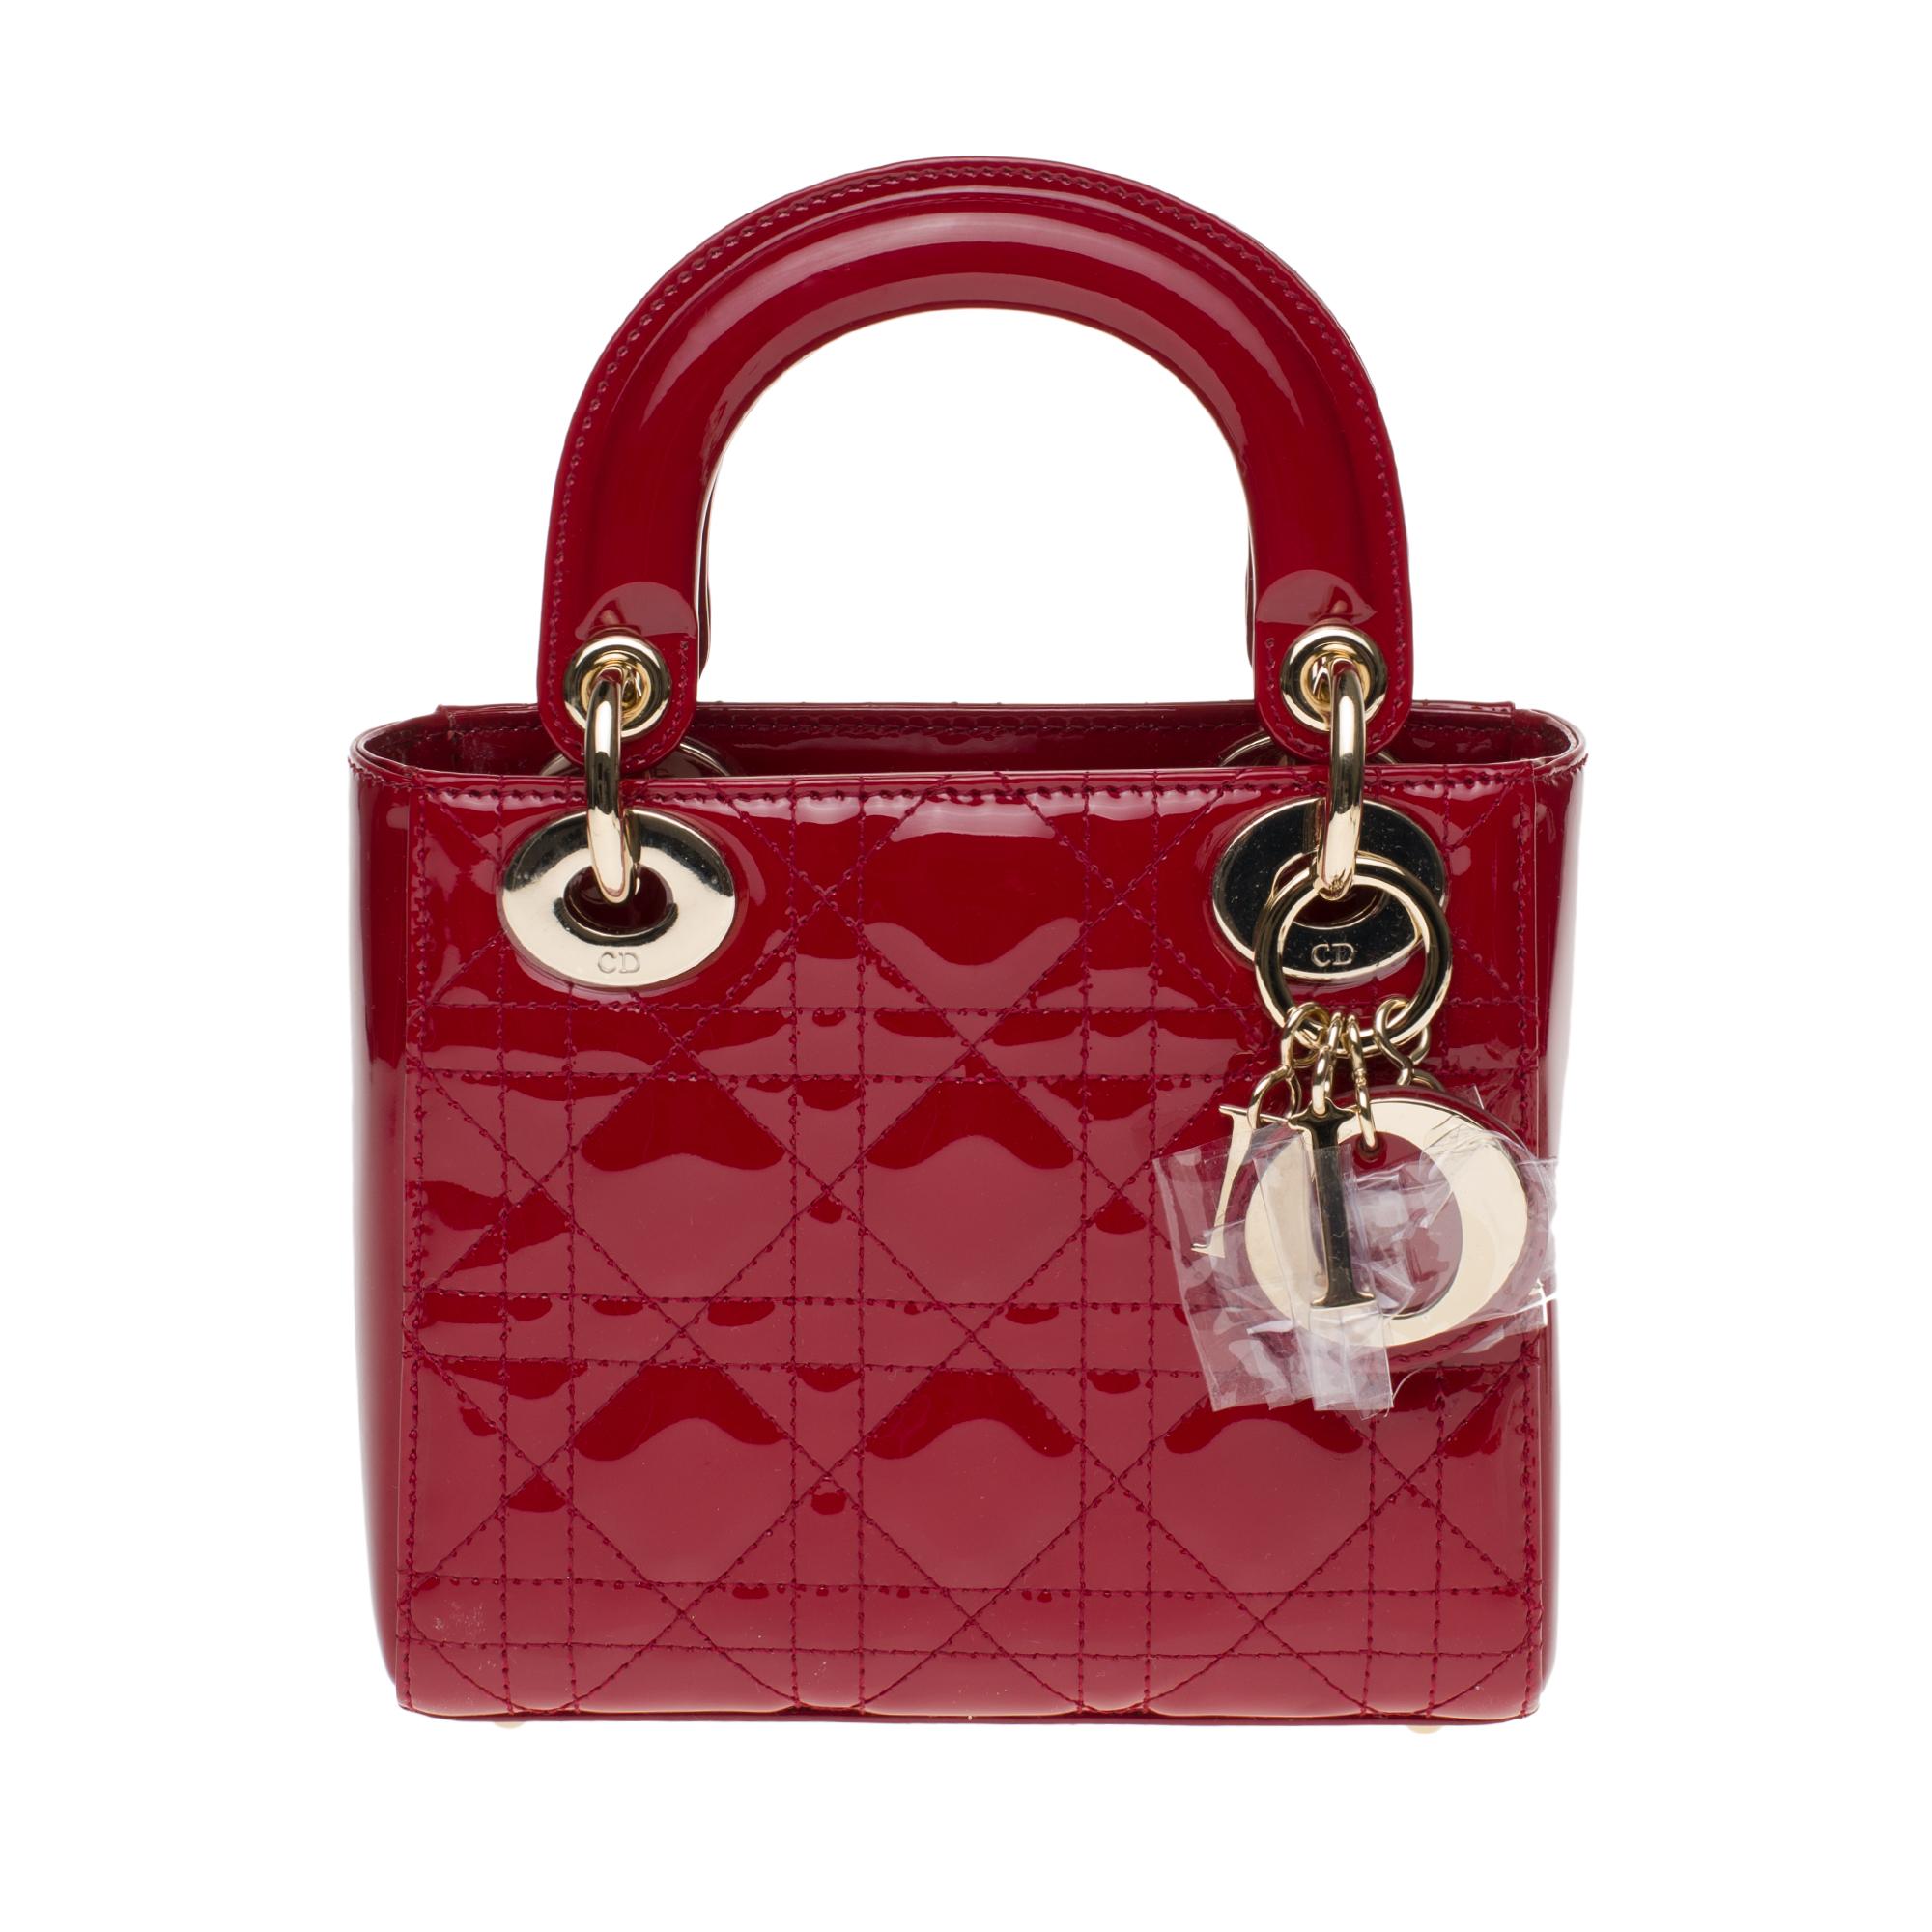 The Lady Dior handbag embodies elegance and beauty according to M. Dior: feminine and refined, timeless and modern. Crafted from cherry red patent lambskin leather and covered with the emblematic cannage motif, its quilting is instantly